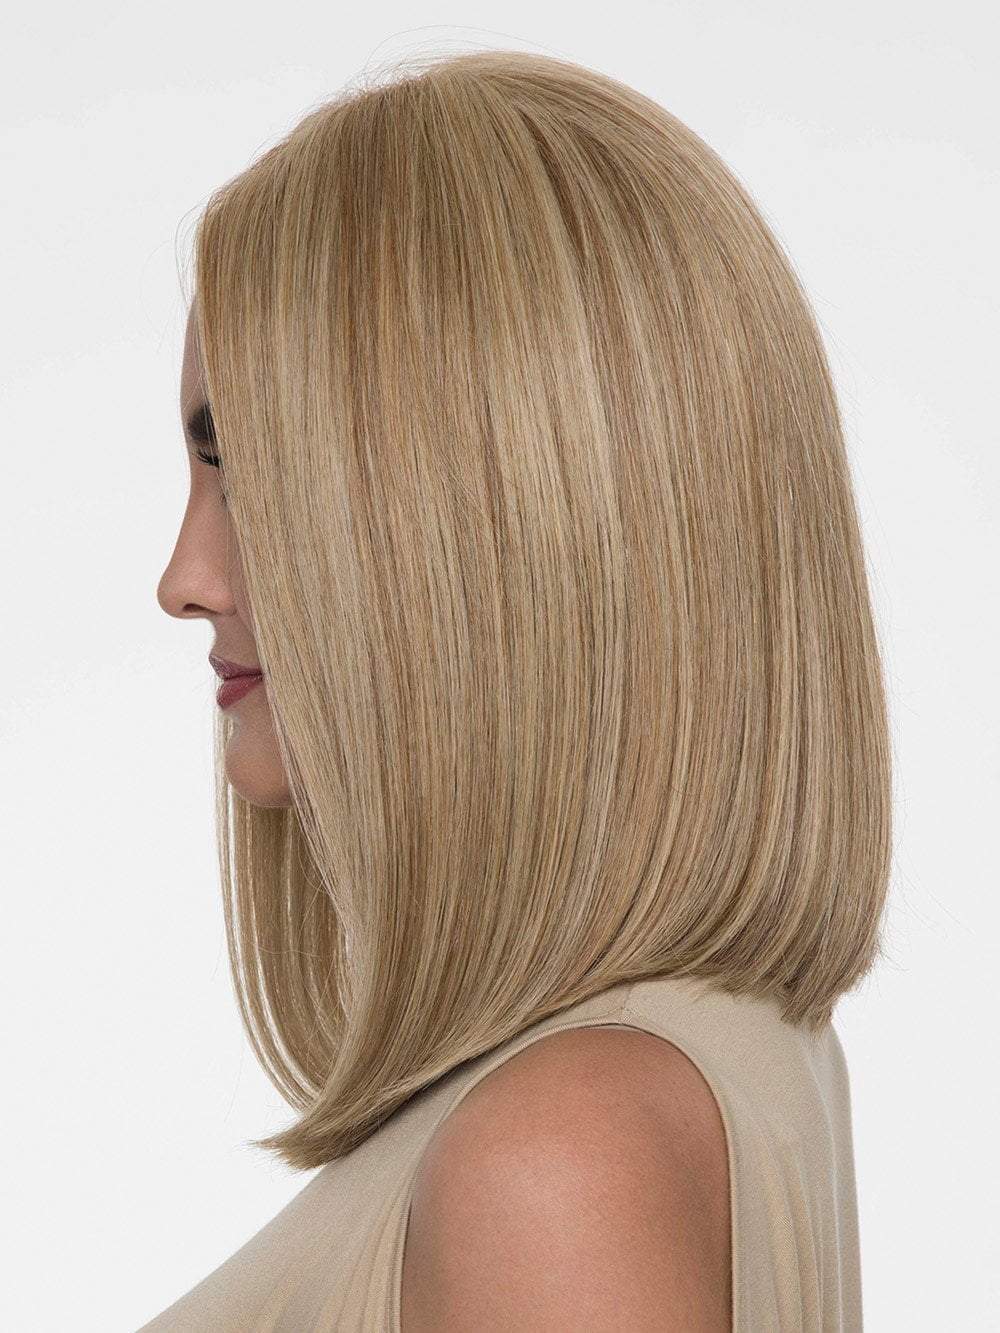 A timeless elegance that abounds with this classic, shoulder-length style